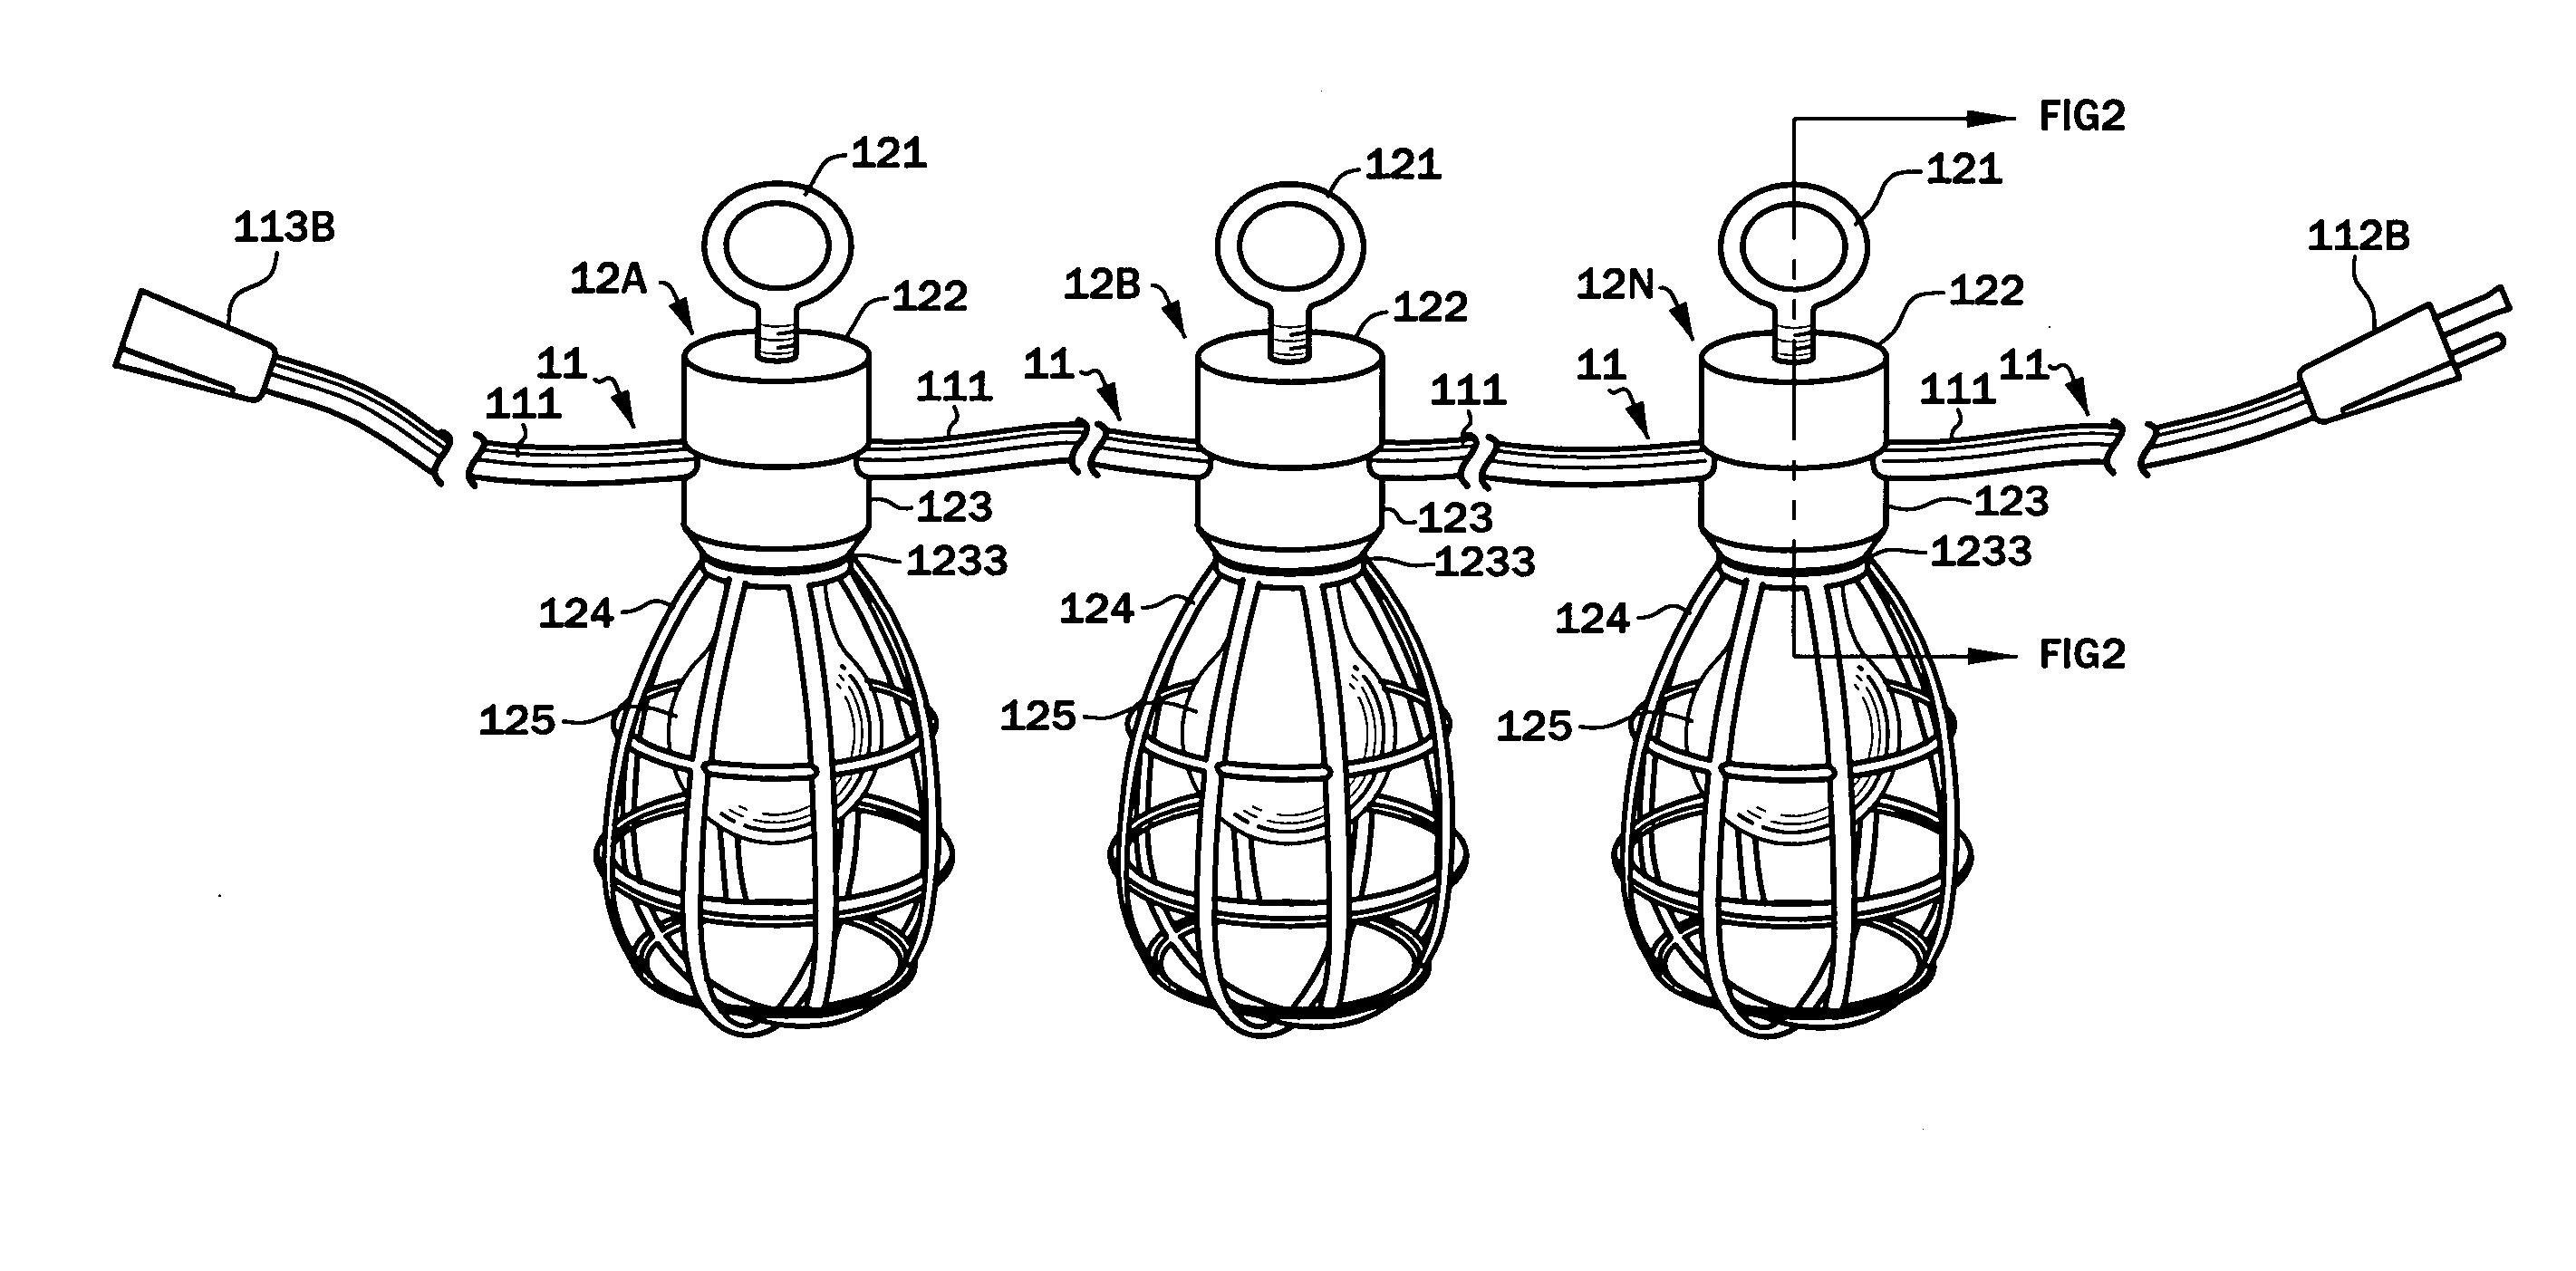 Temporary work light string with variably-positionable and re-positionable readily-replaced lamp, optionally with integral hangers, that are optionally electrically connected to plural electrical circuits